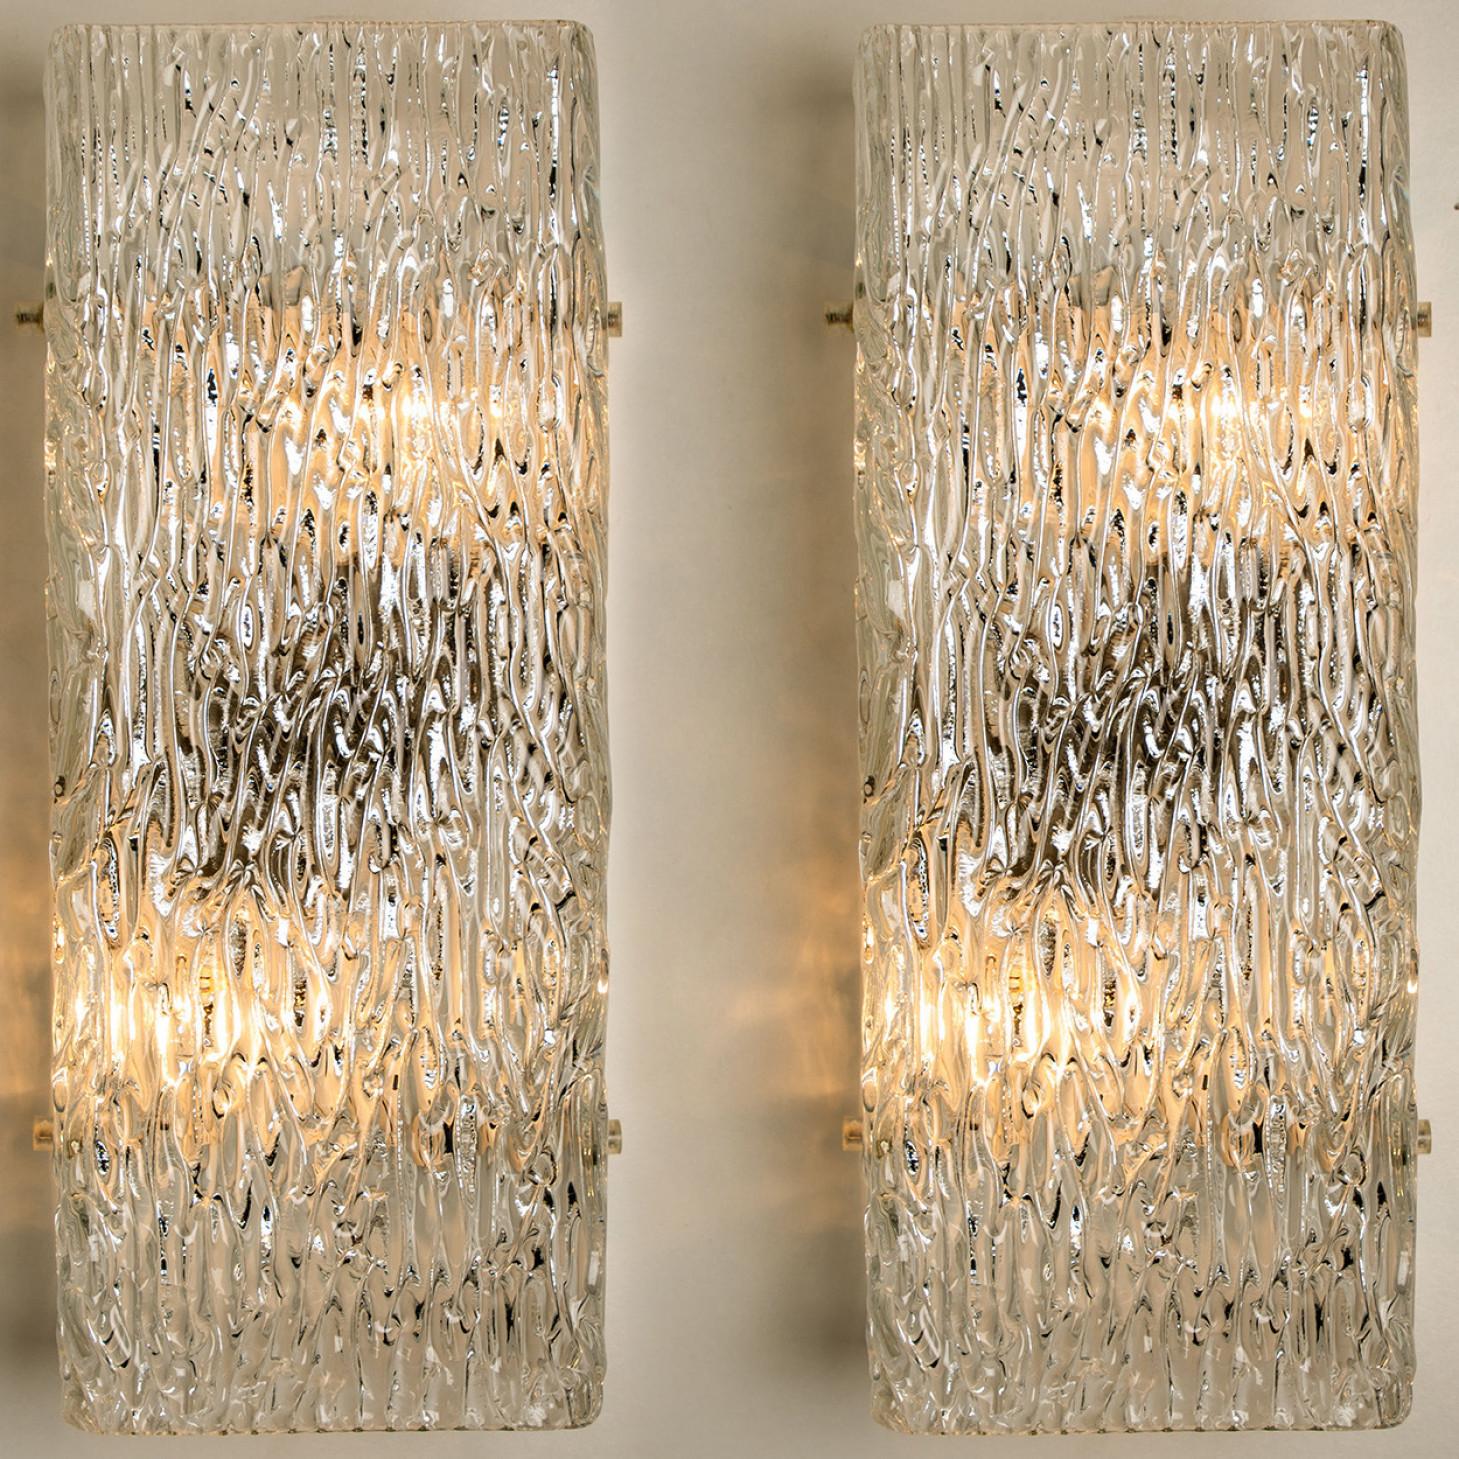 Other Large Textured Rock Wave Glass Wall Lights by J.T. Kalmar, Austria, 1960s For Sale